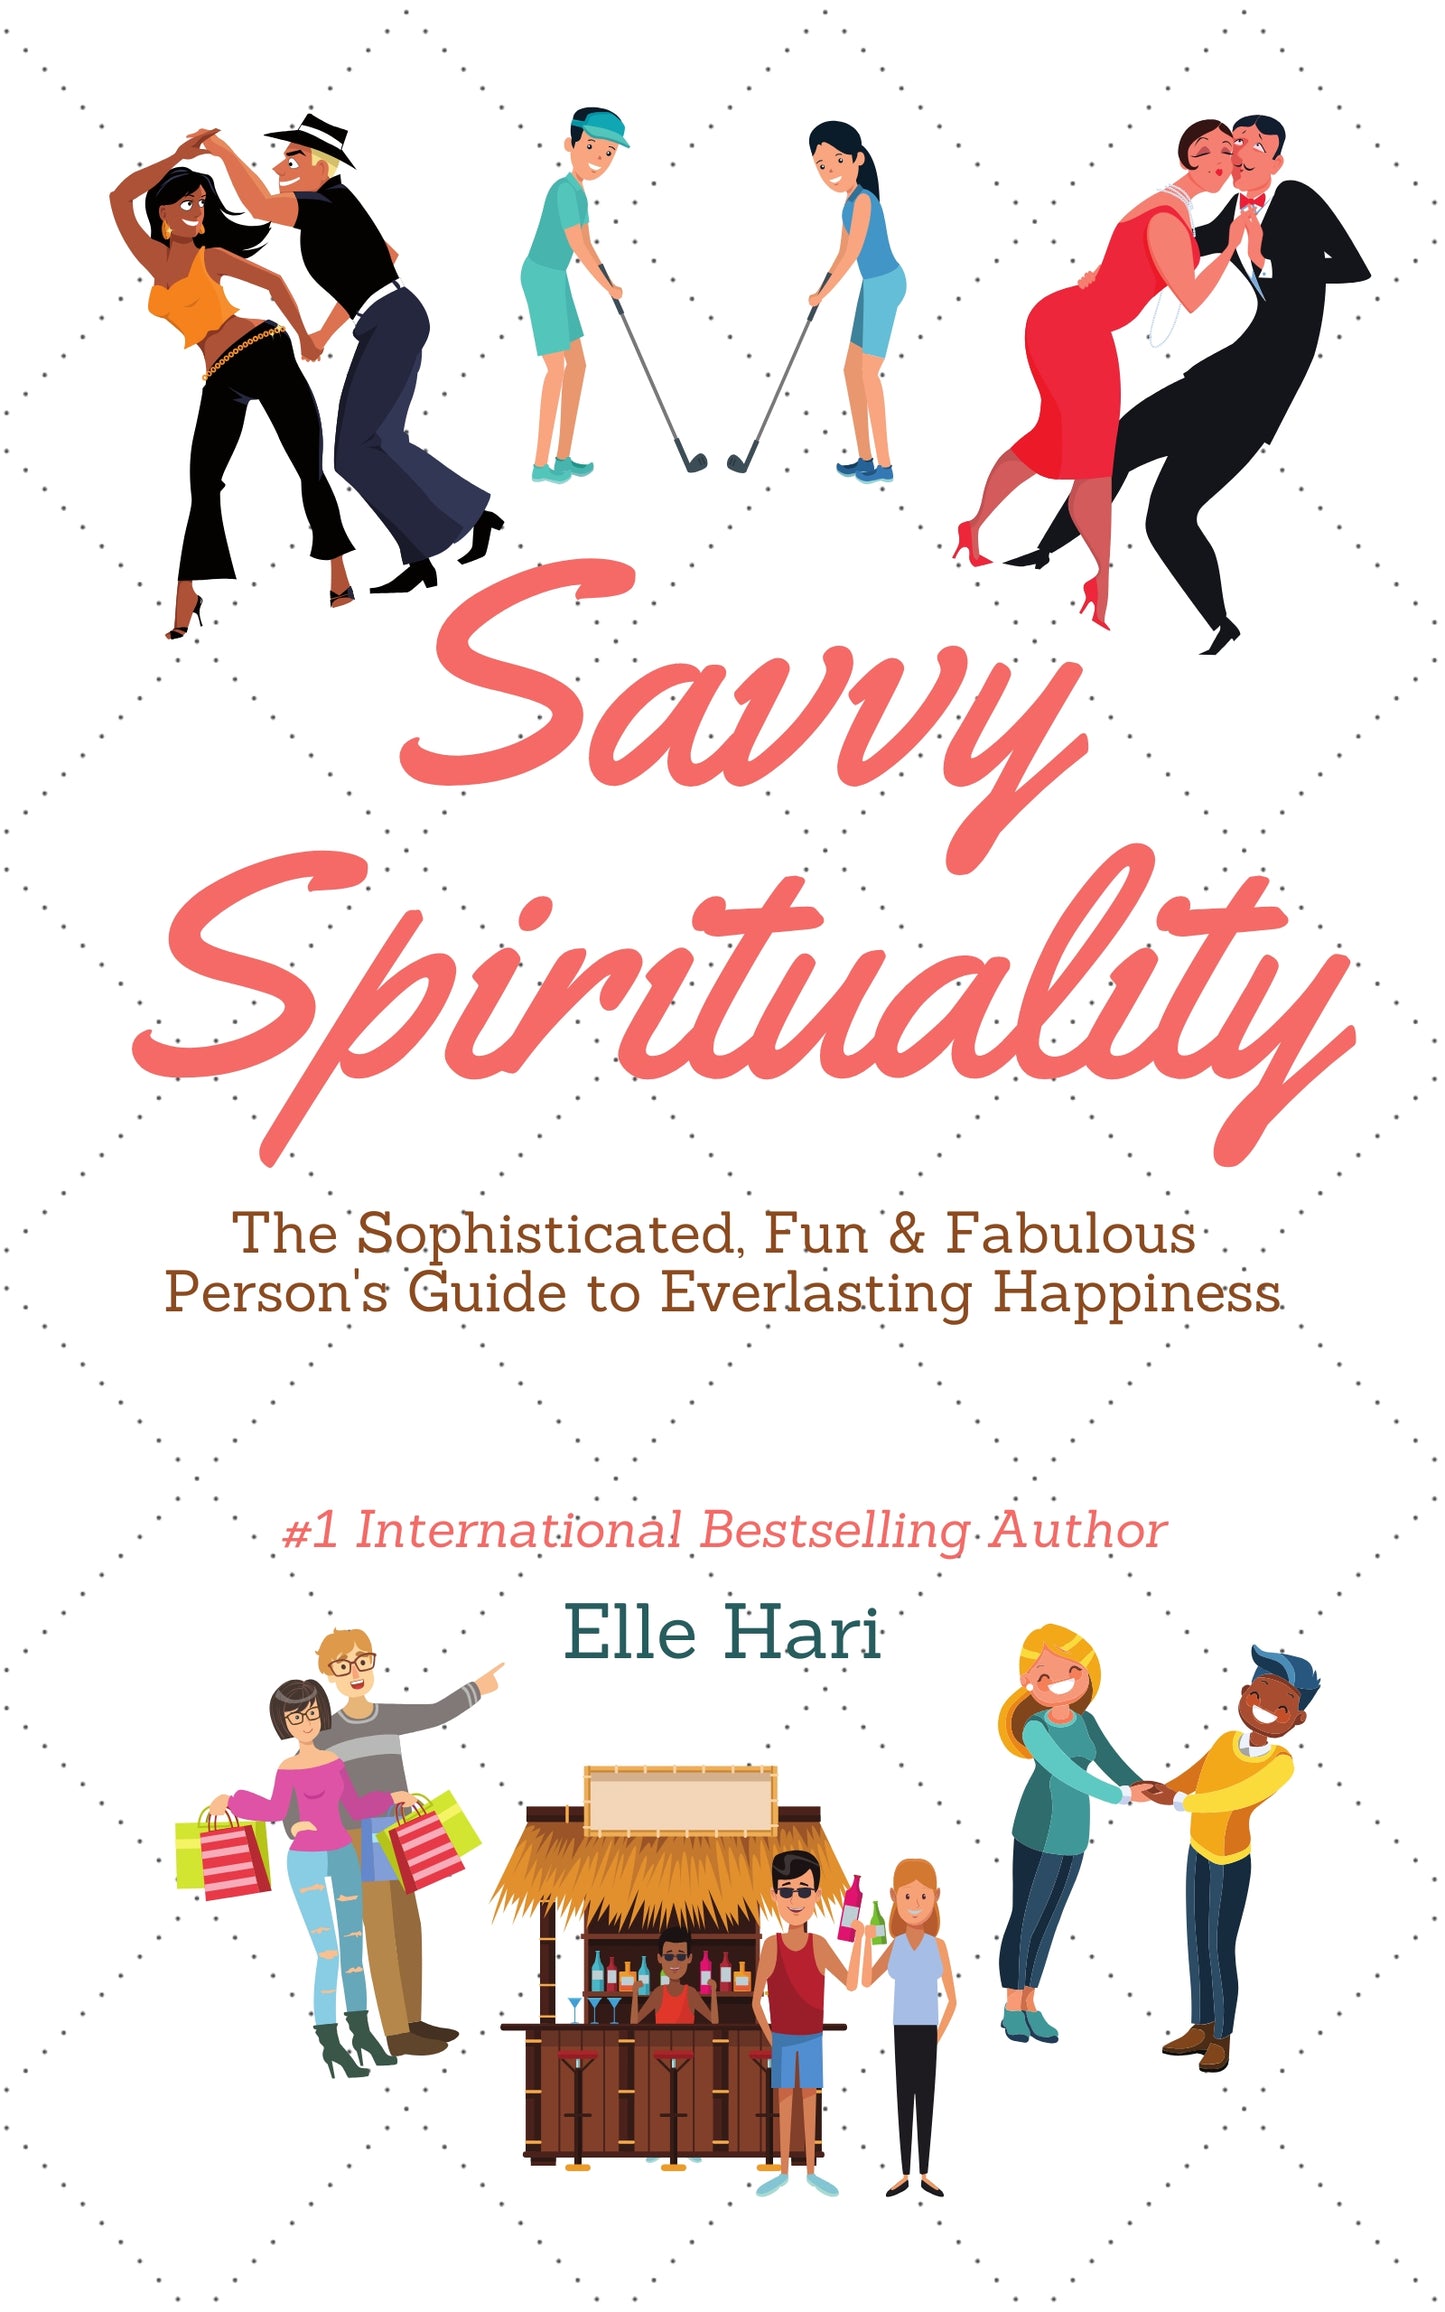 Savvy Spirituality: The Sophisticated, Fun & Fabulous Person's Ultimate Guide to Everlasting Happiness (Kindle & ePub)